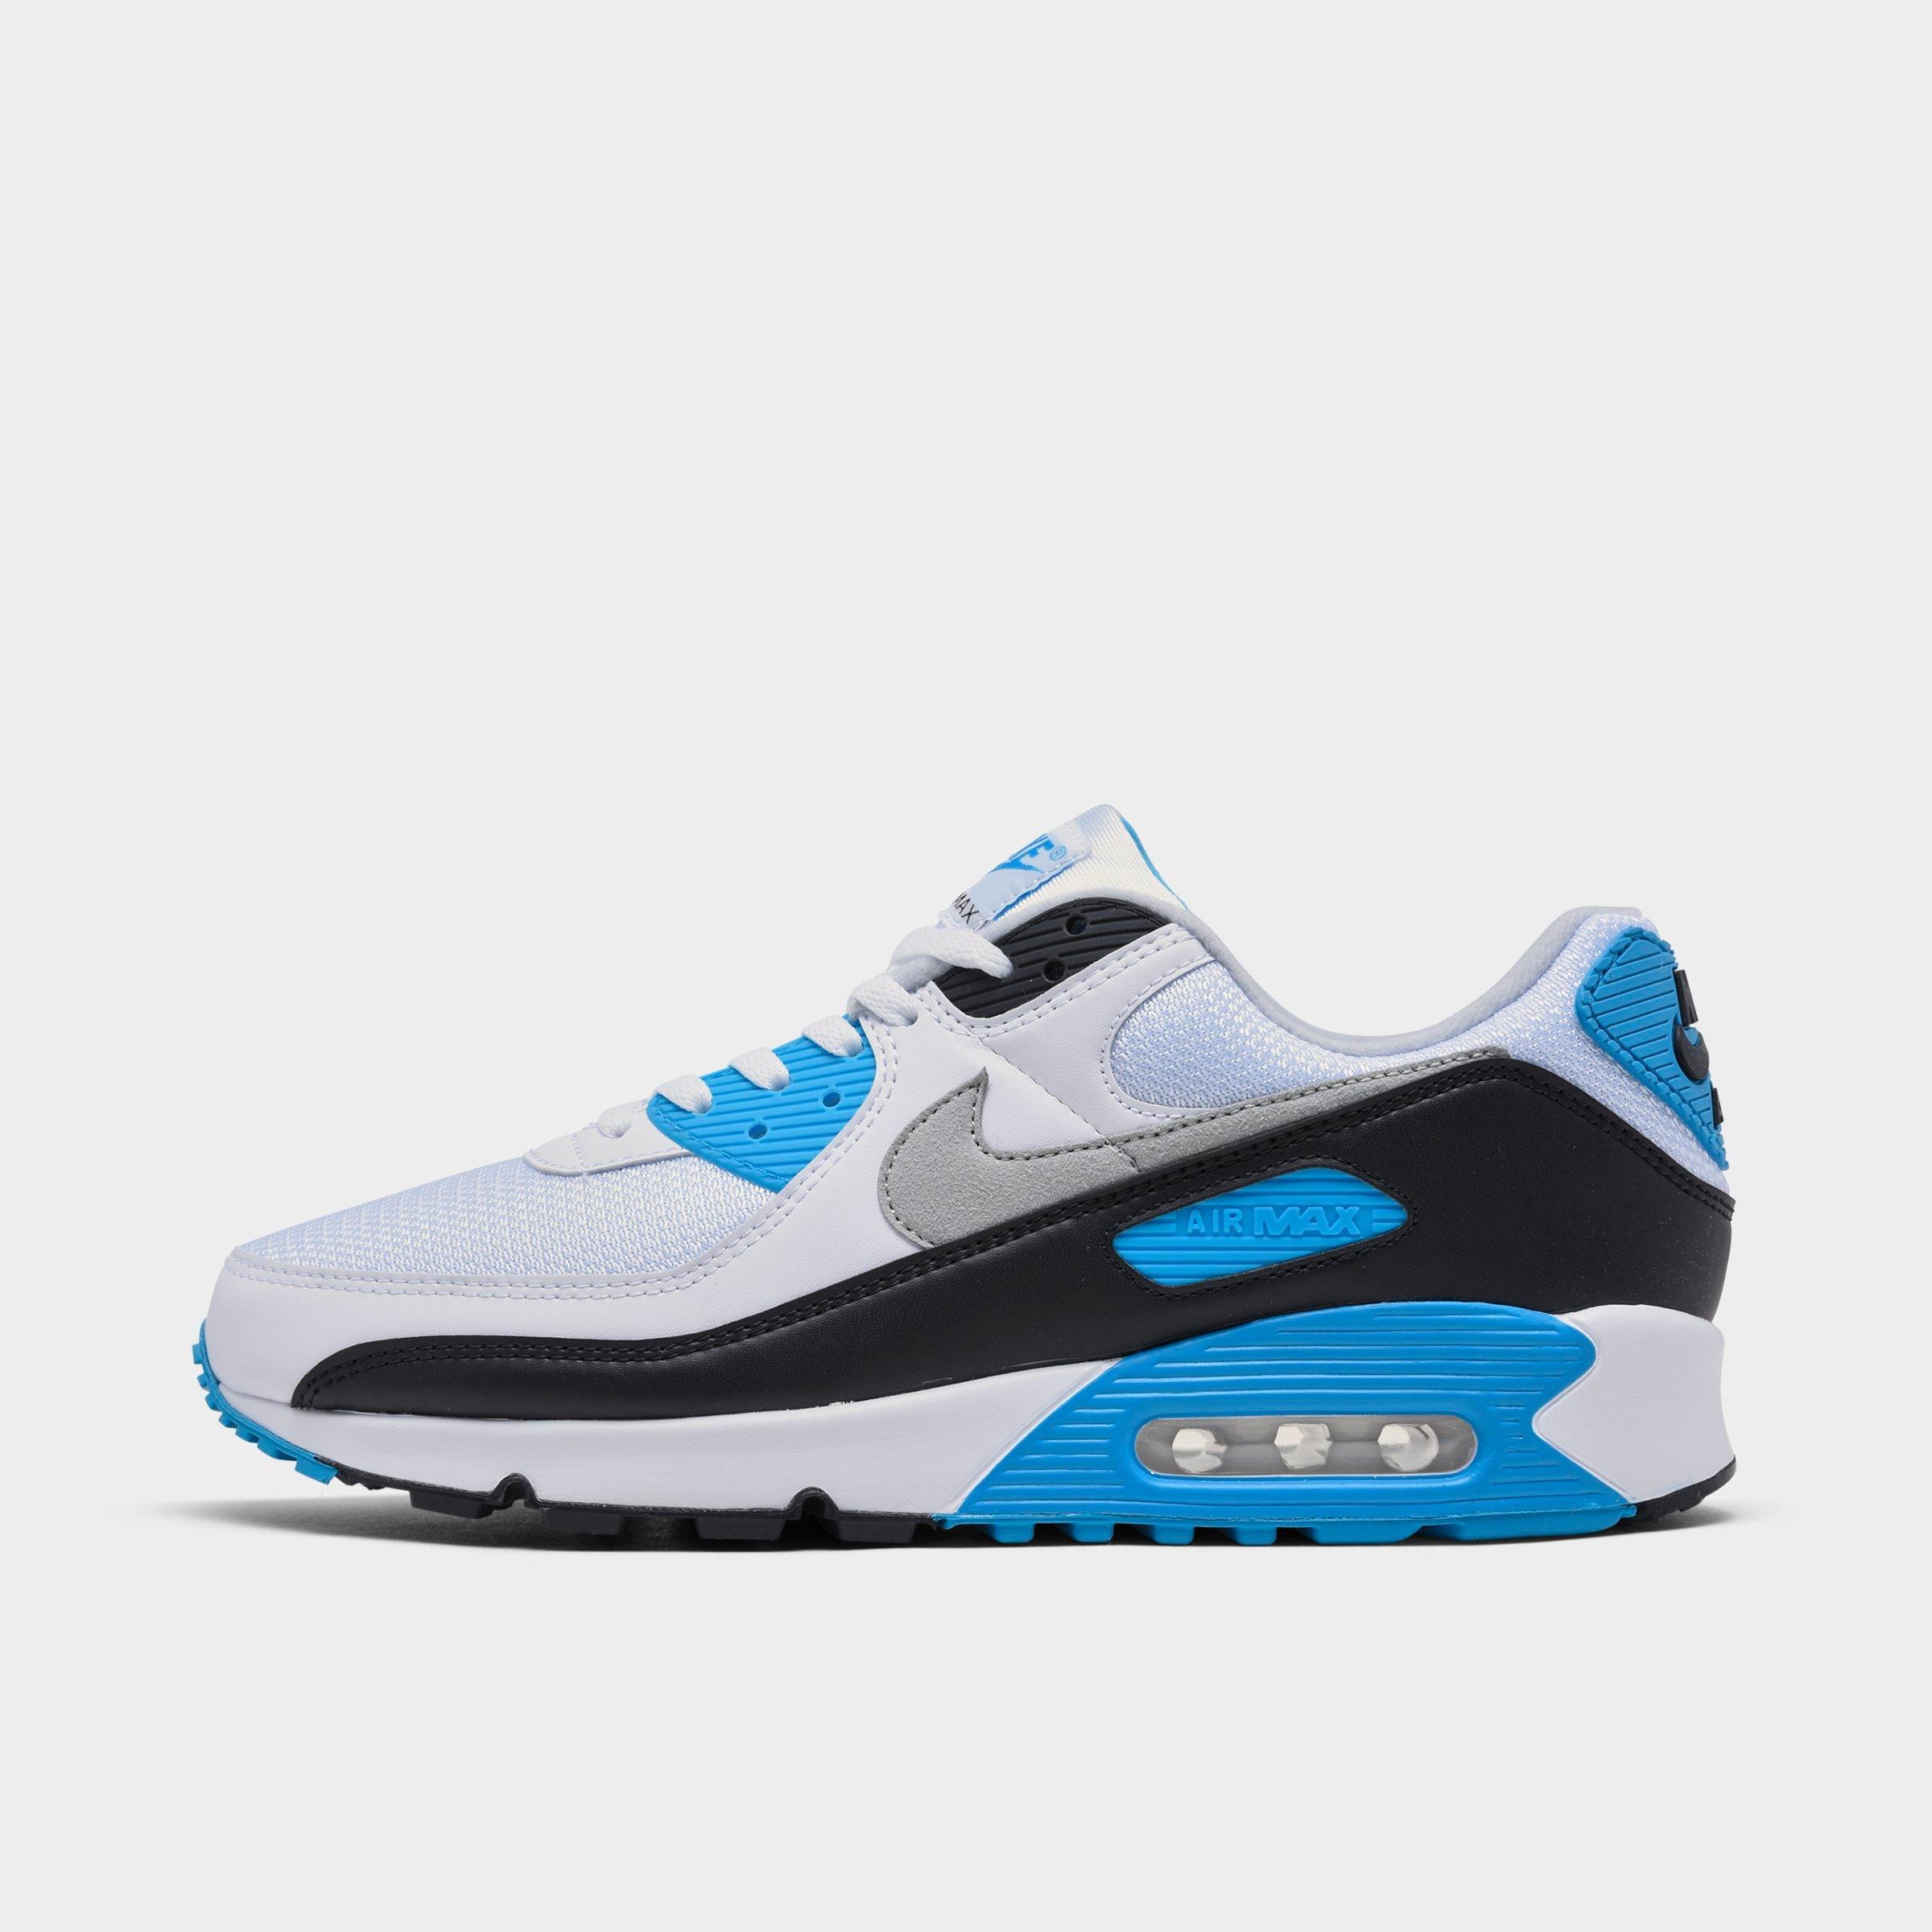 finish line air max sneakers